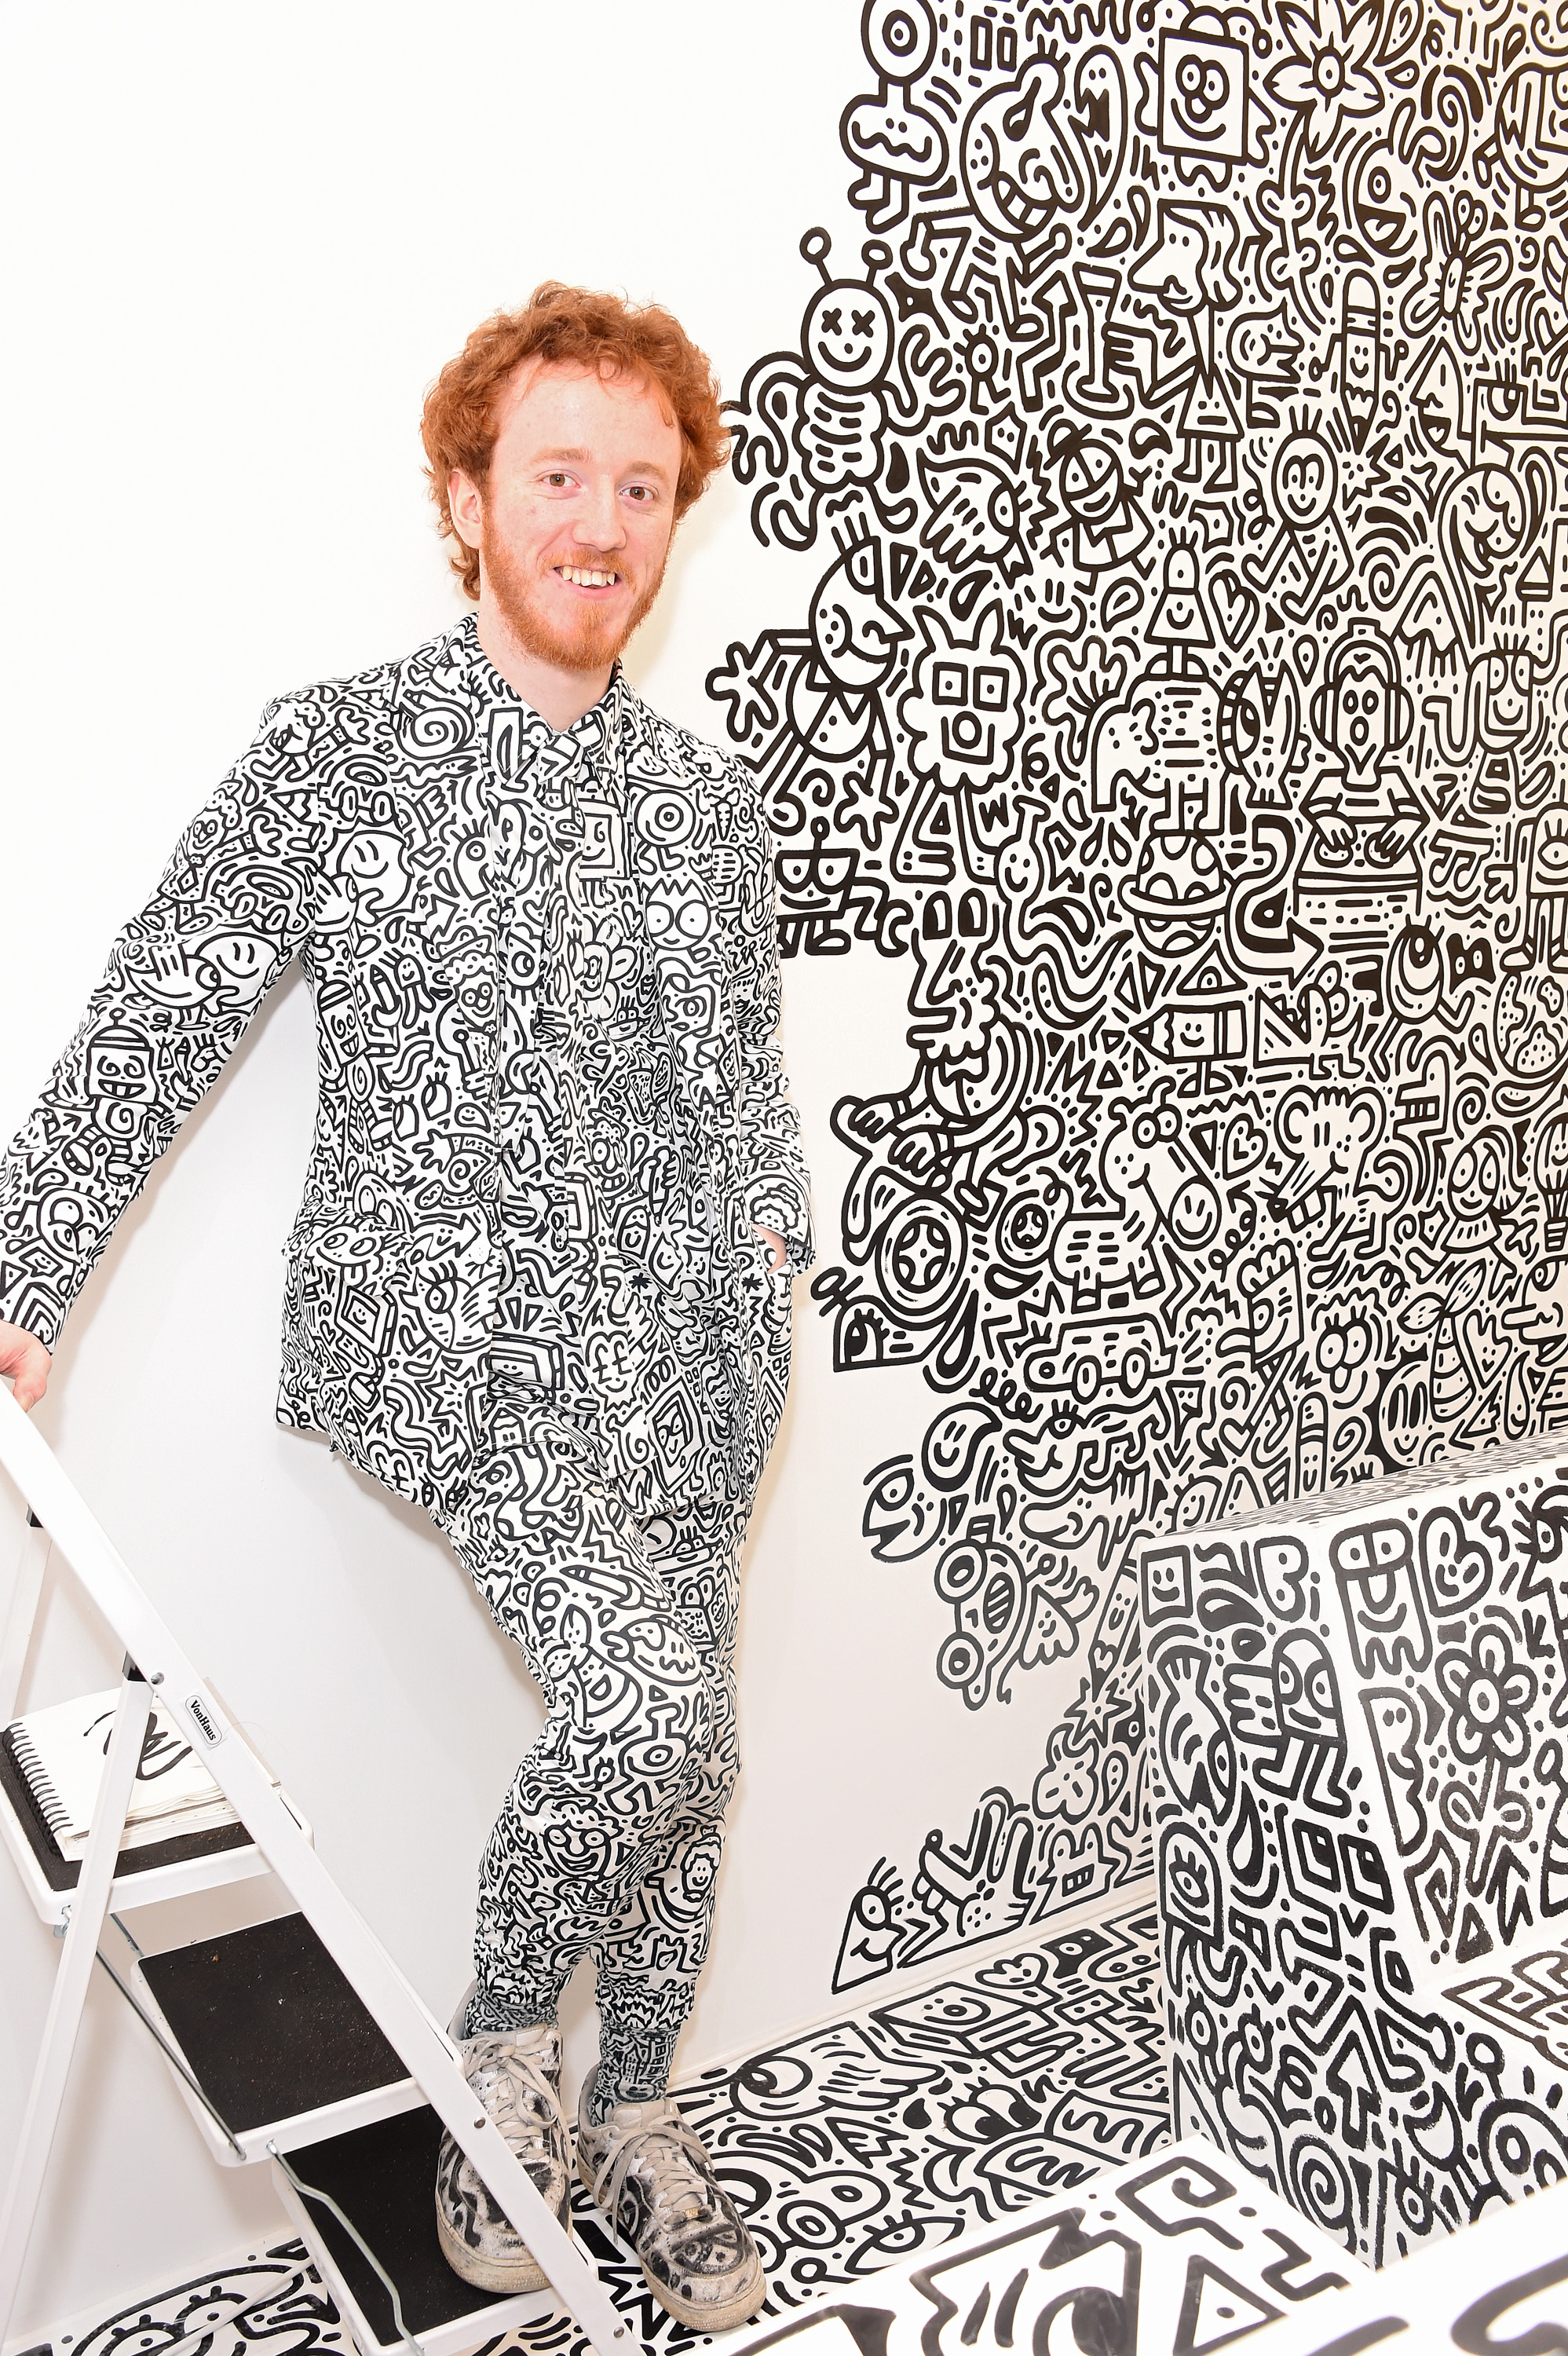 How An Artist Named Mr. Doodle Became A Multimillion Dollar Auction Sensation With A Bunch Of Squiggles And 'Like' Able Branding